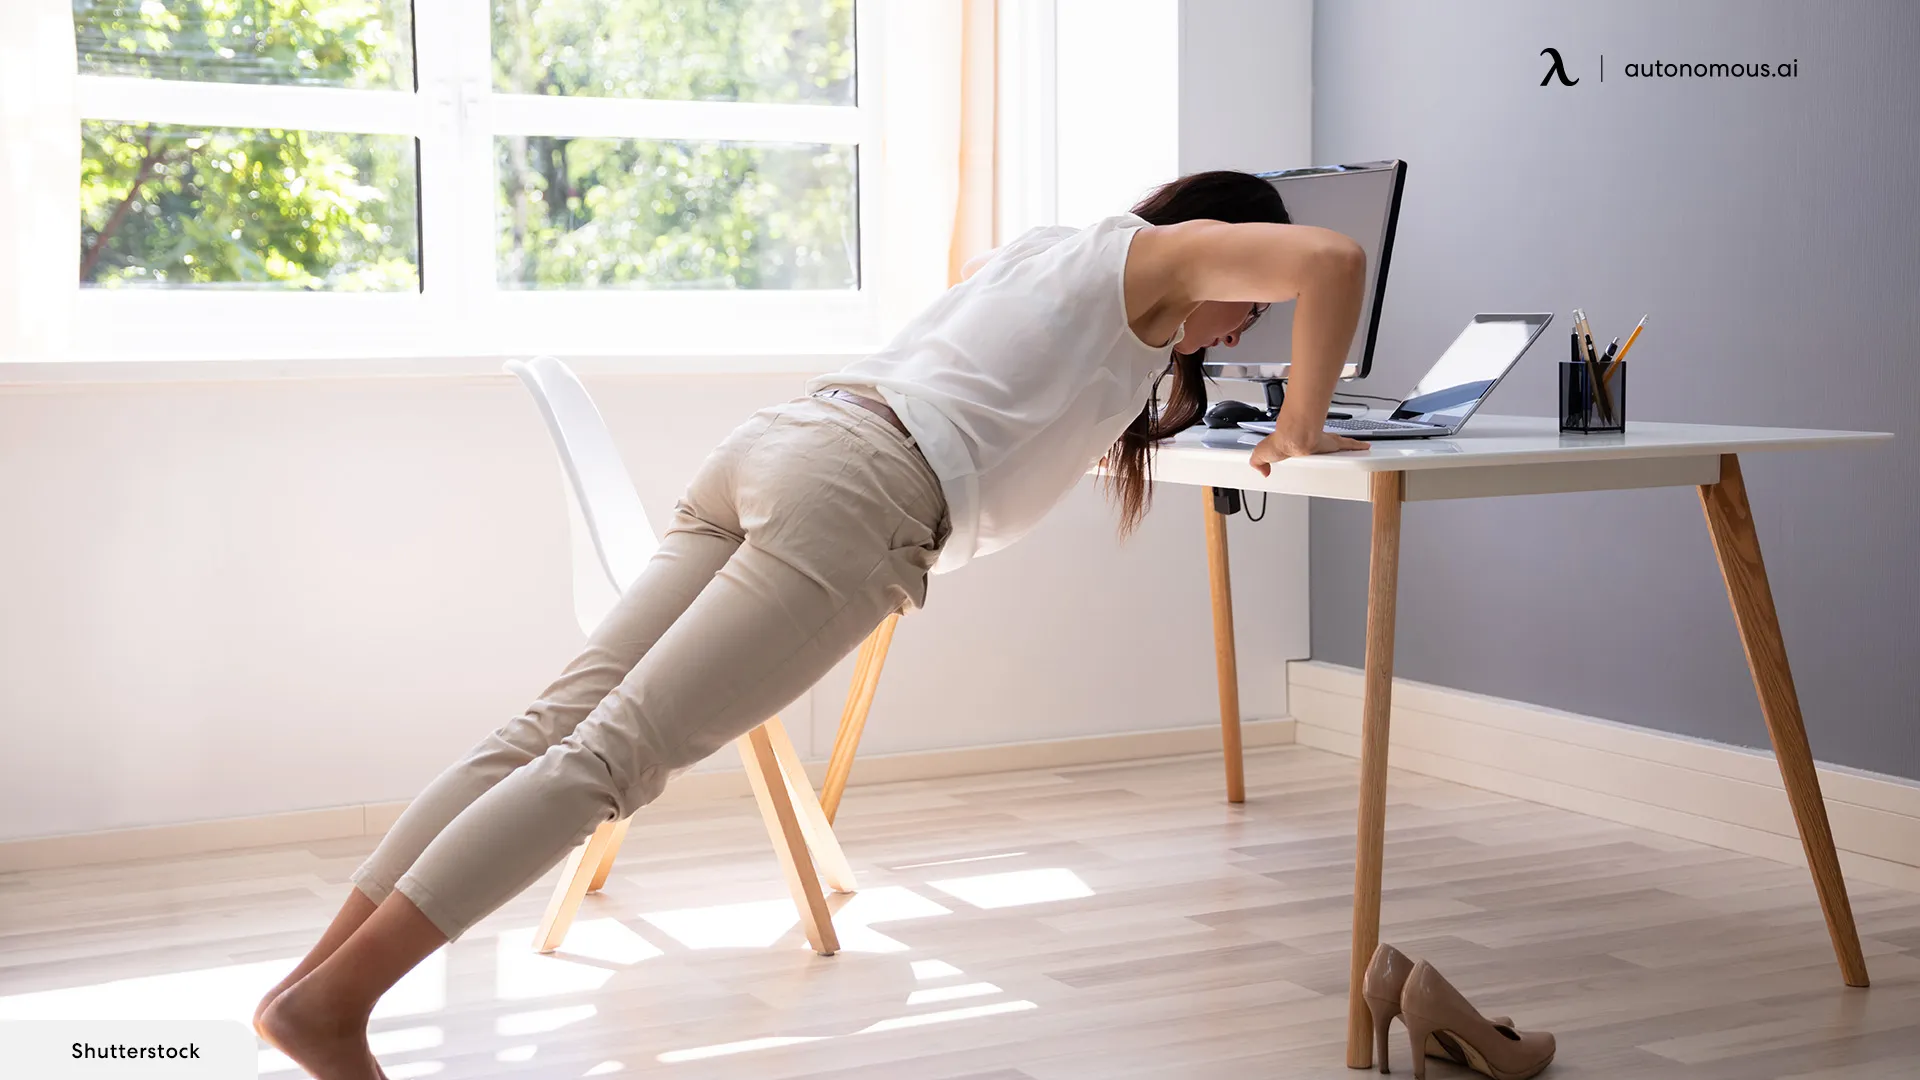 Five Other Exercises to Do at the Office